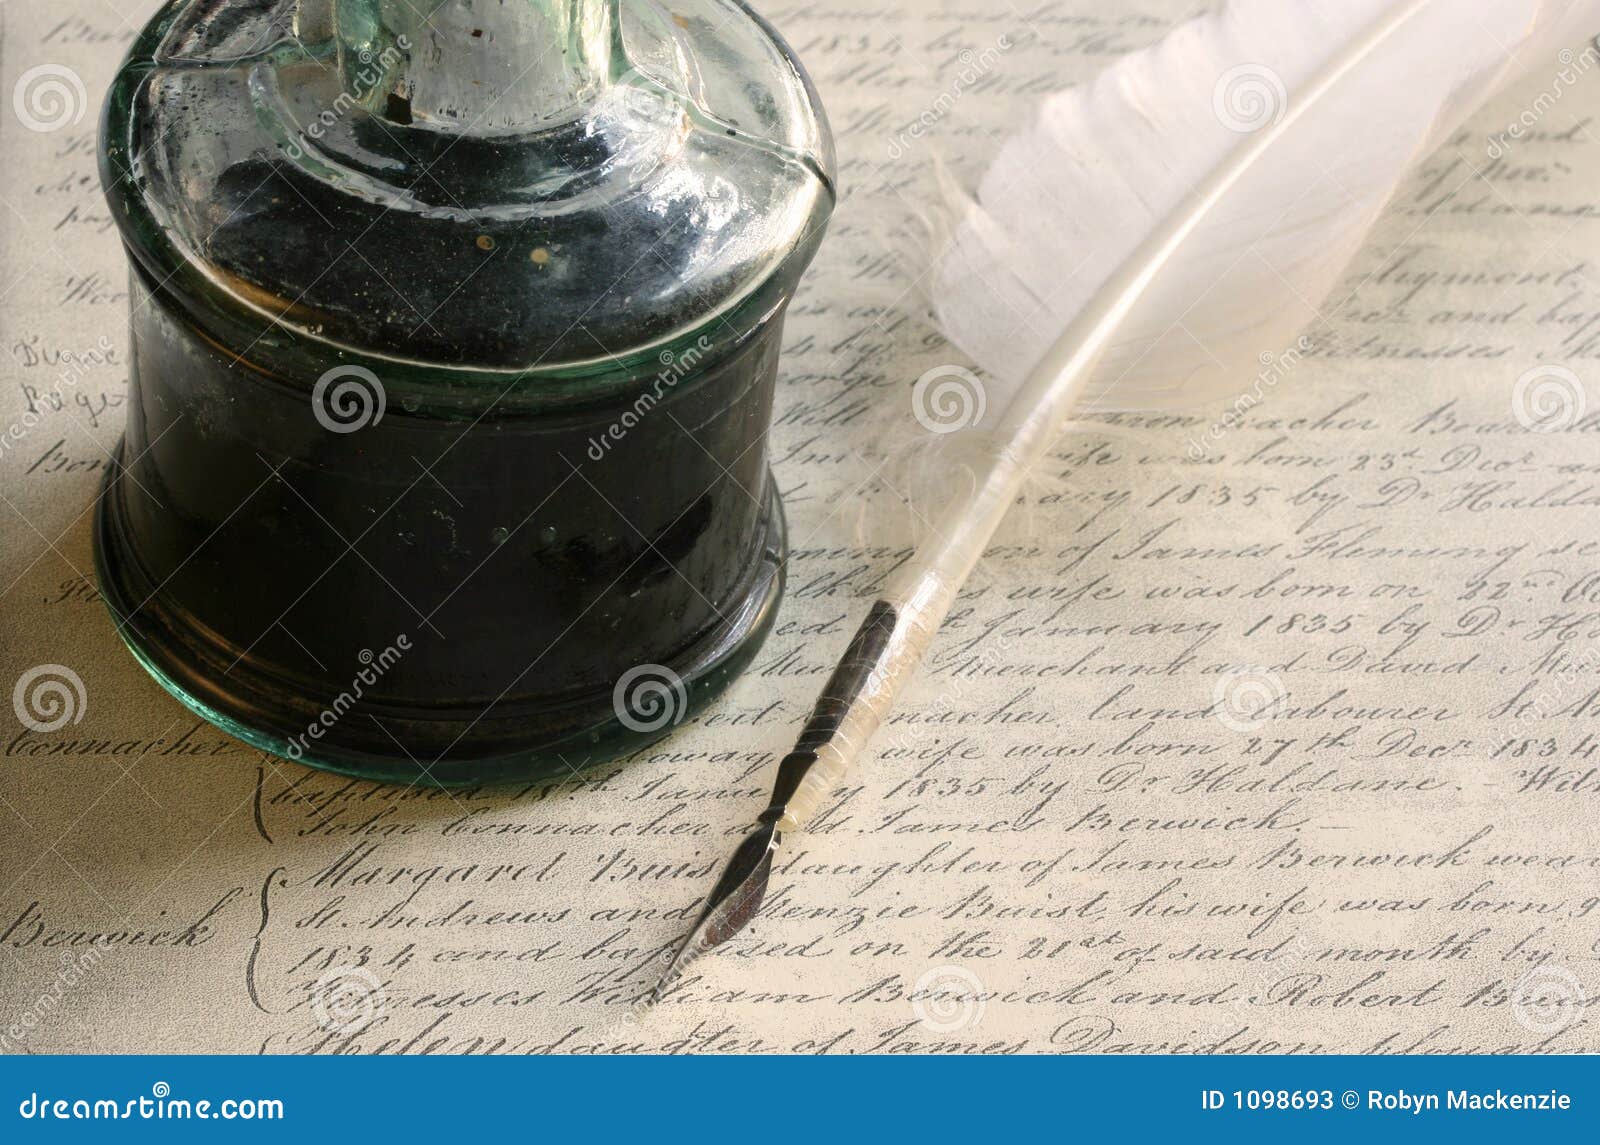 feather quill pen and inkwell